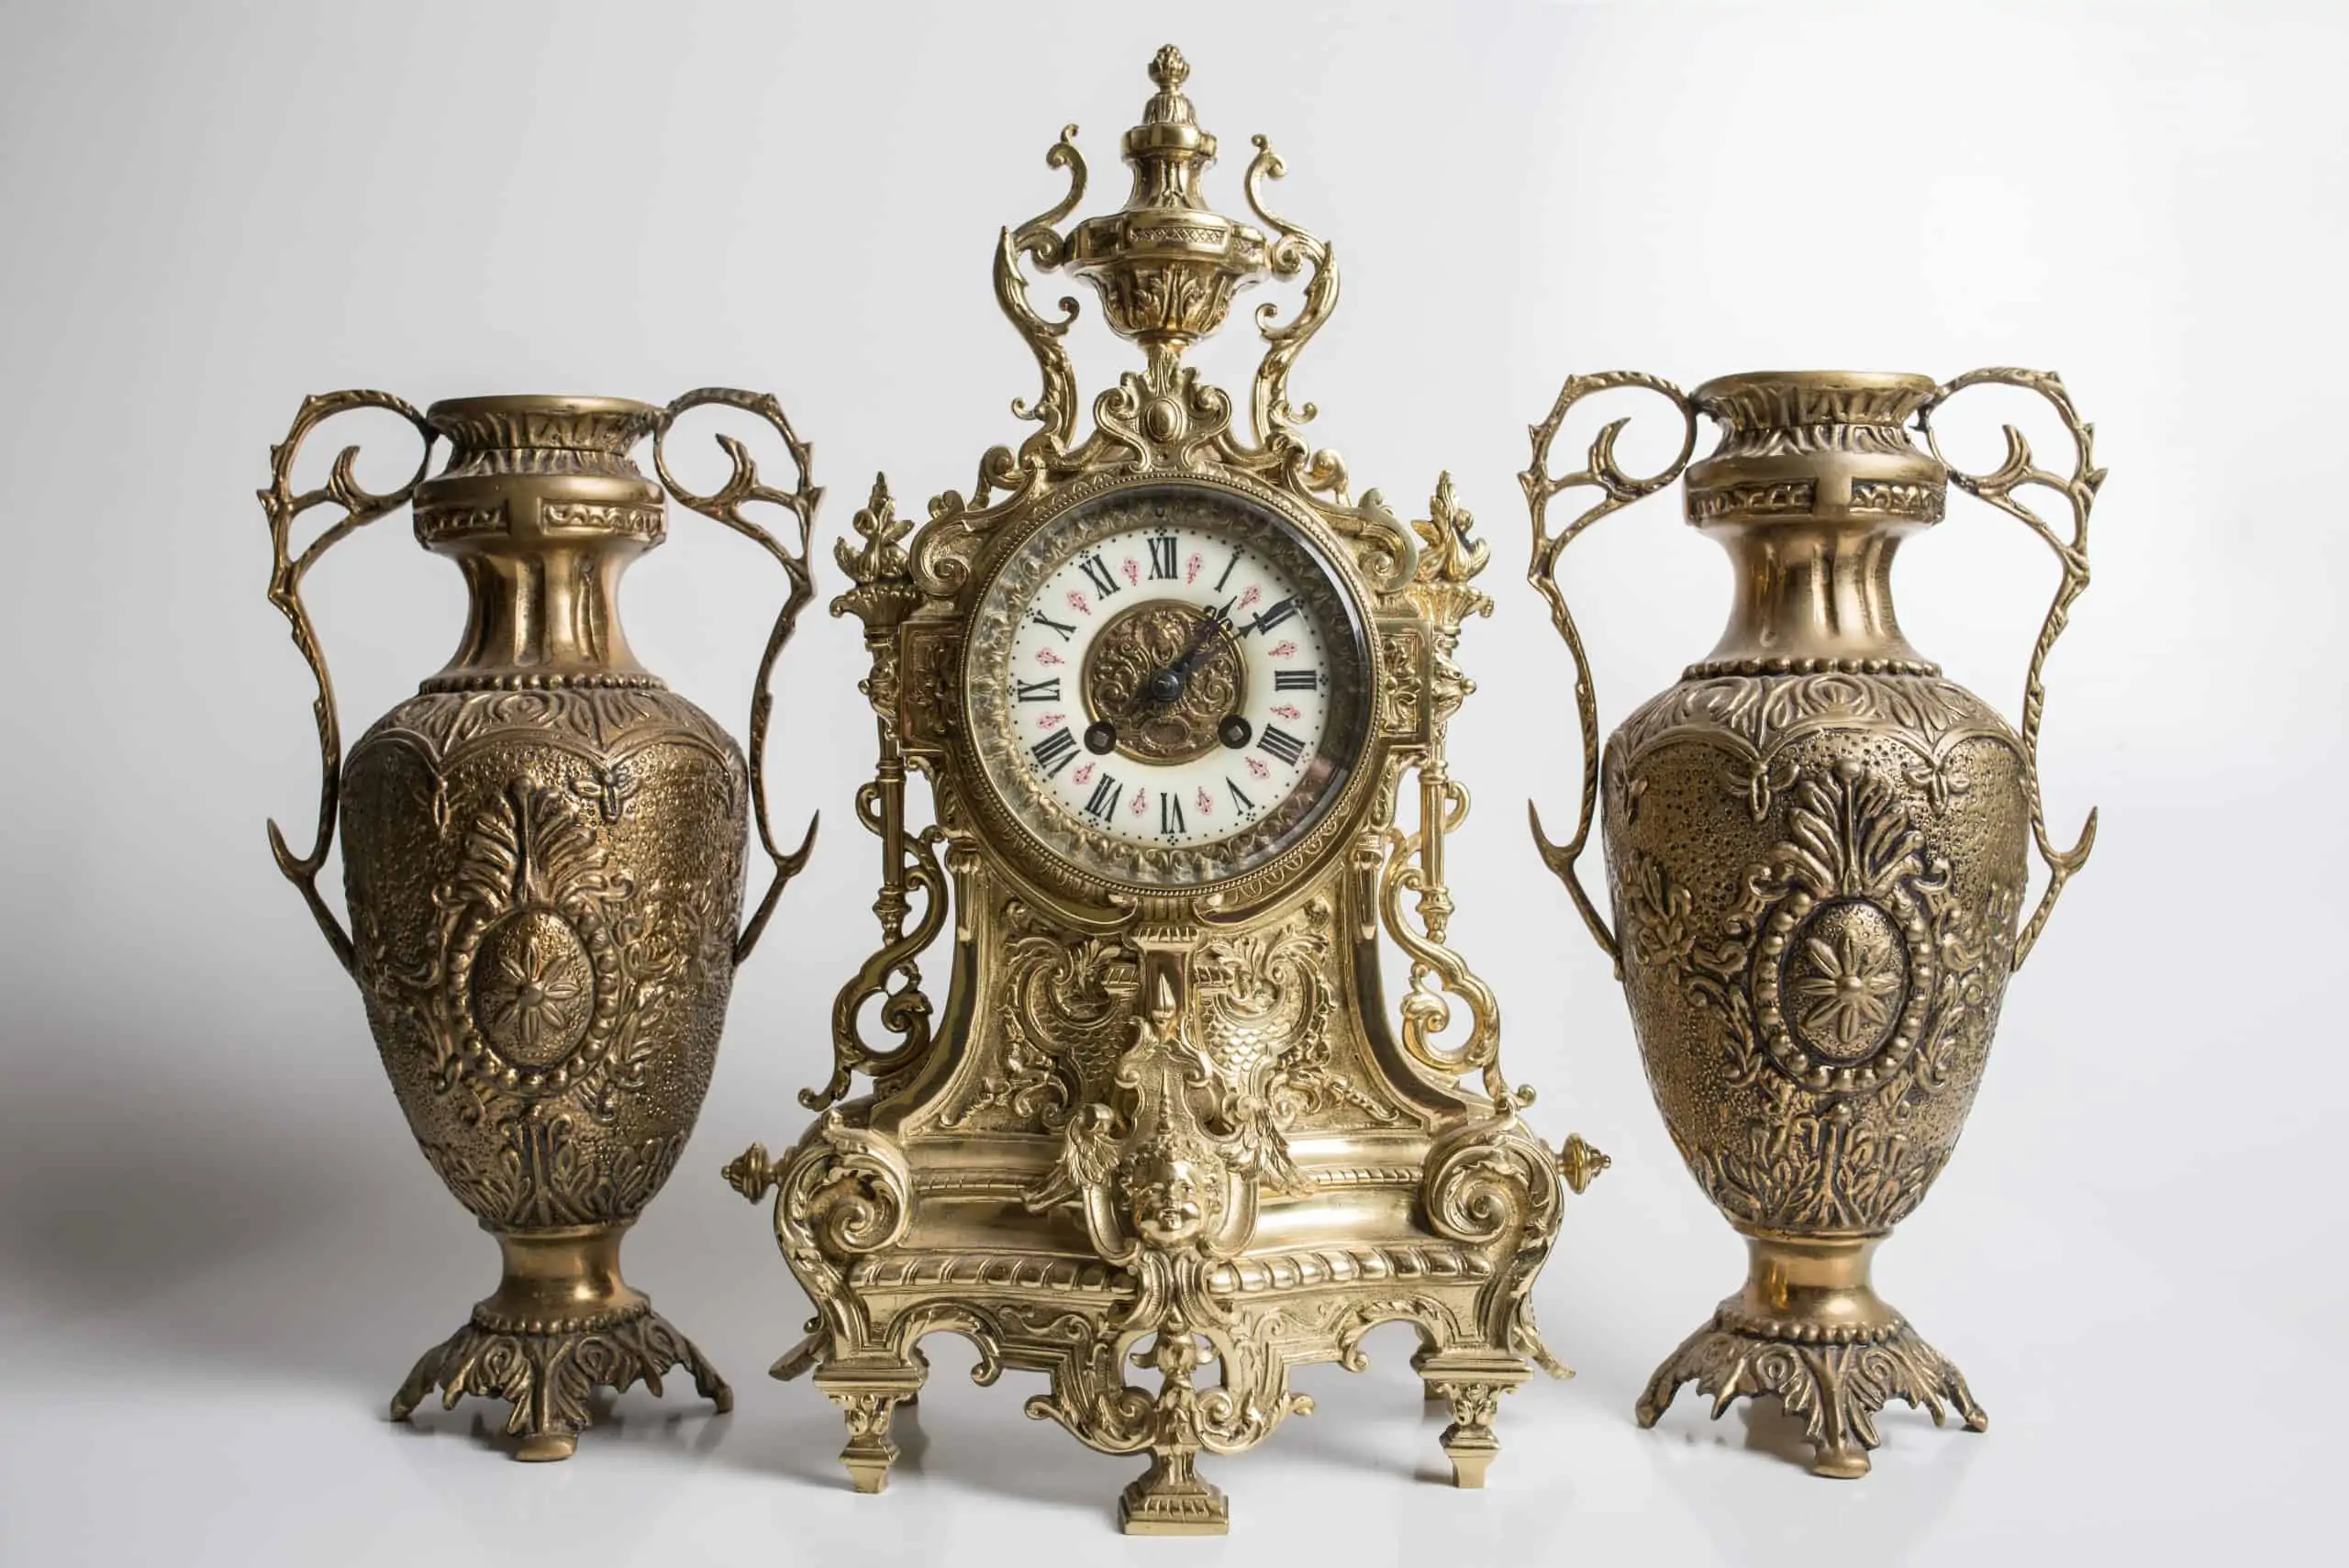 sell antiques on long island